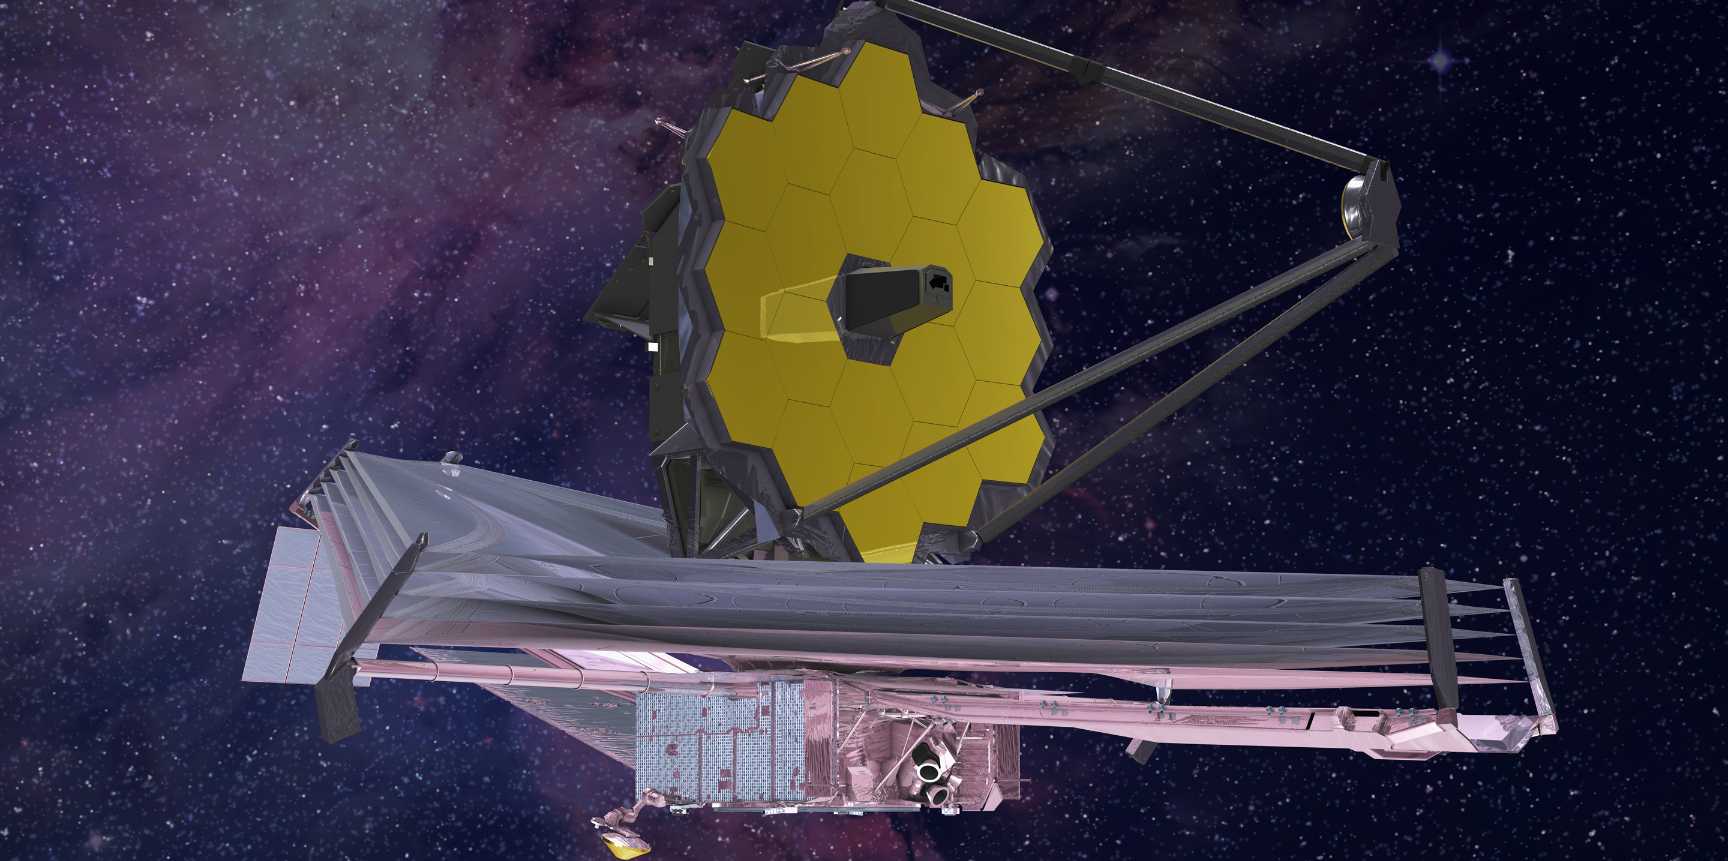 Enlarged view: Artistic impression of The James Webb Space Telescope